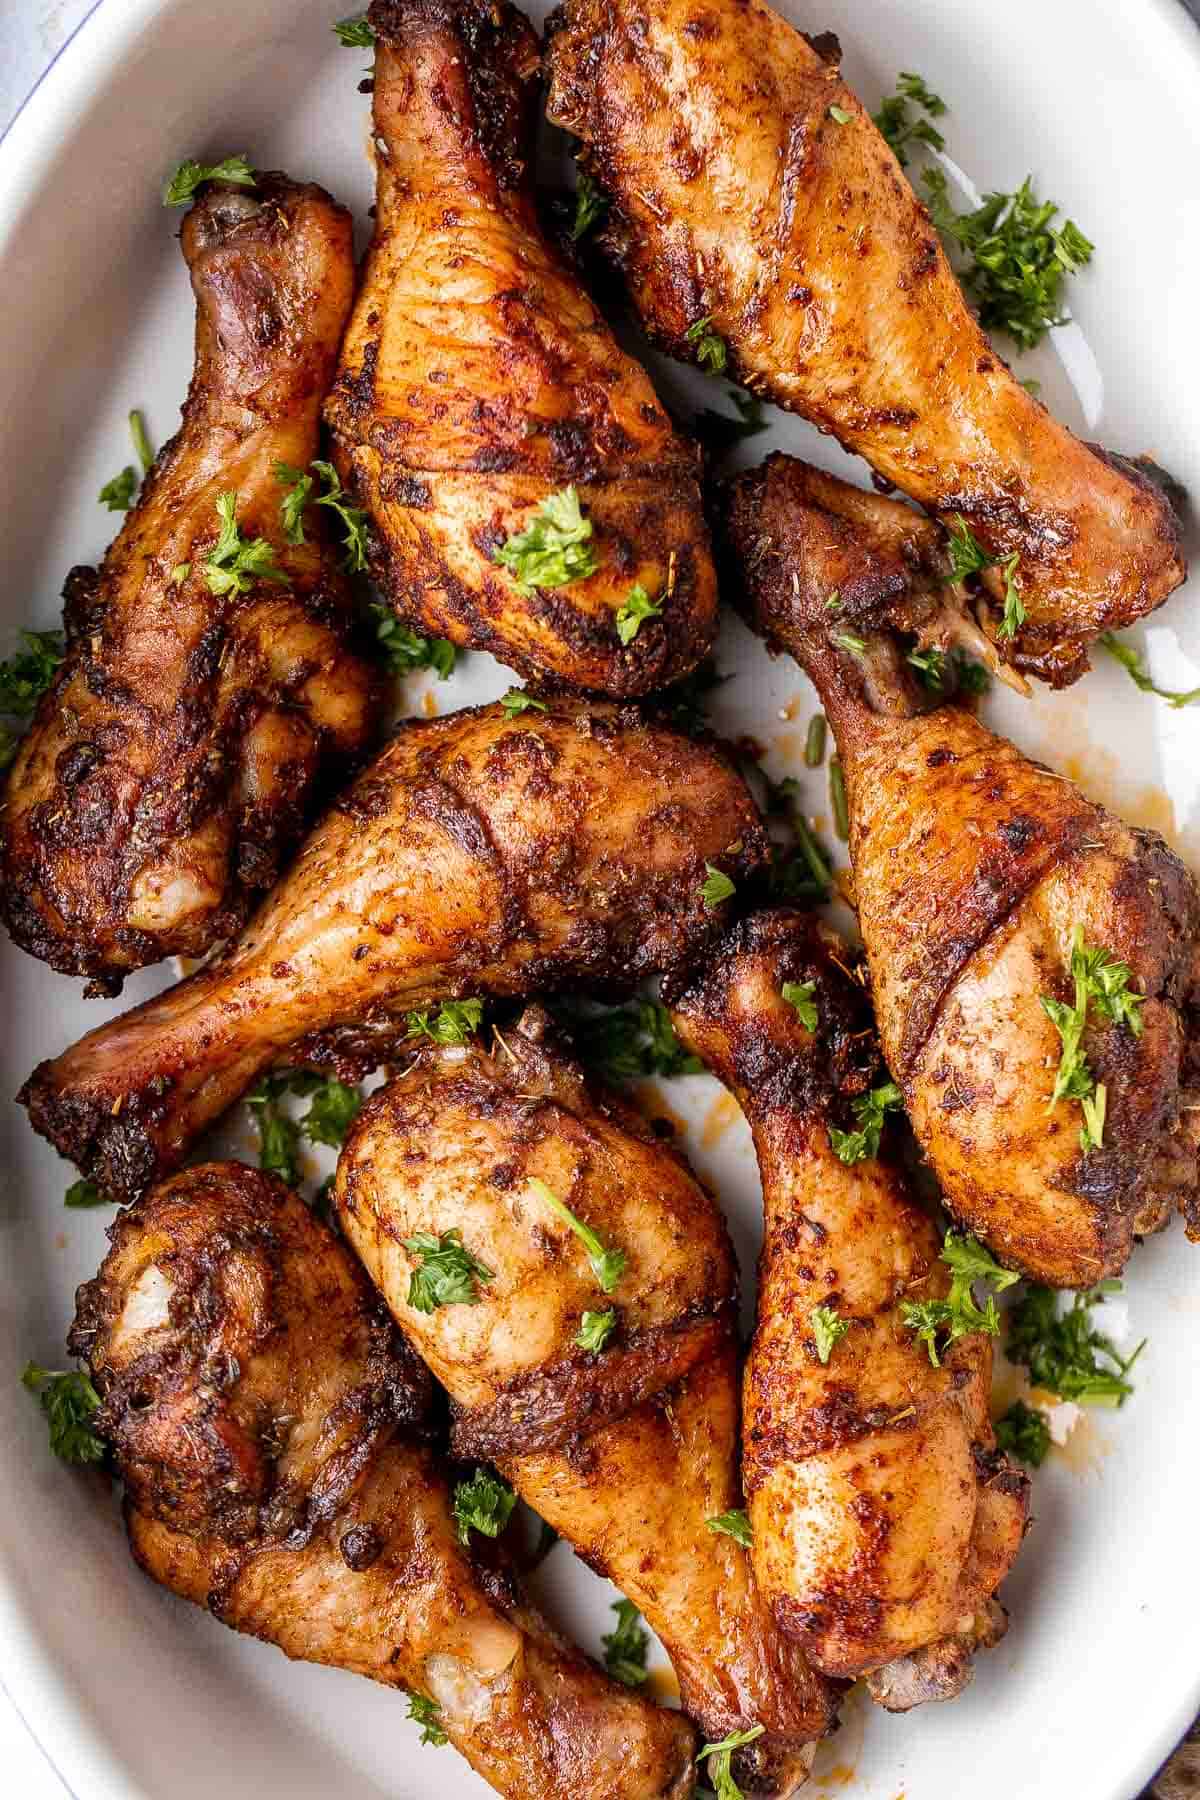 Baked Chicken Drumsticks are ideal for busy weeknights. Marinate inexpensive chicken legs with everyday spices and bake until crispy, tender, and flavorful. | aheadofthyme.com